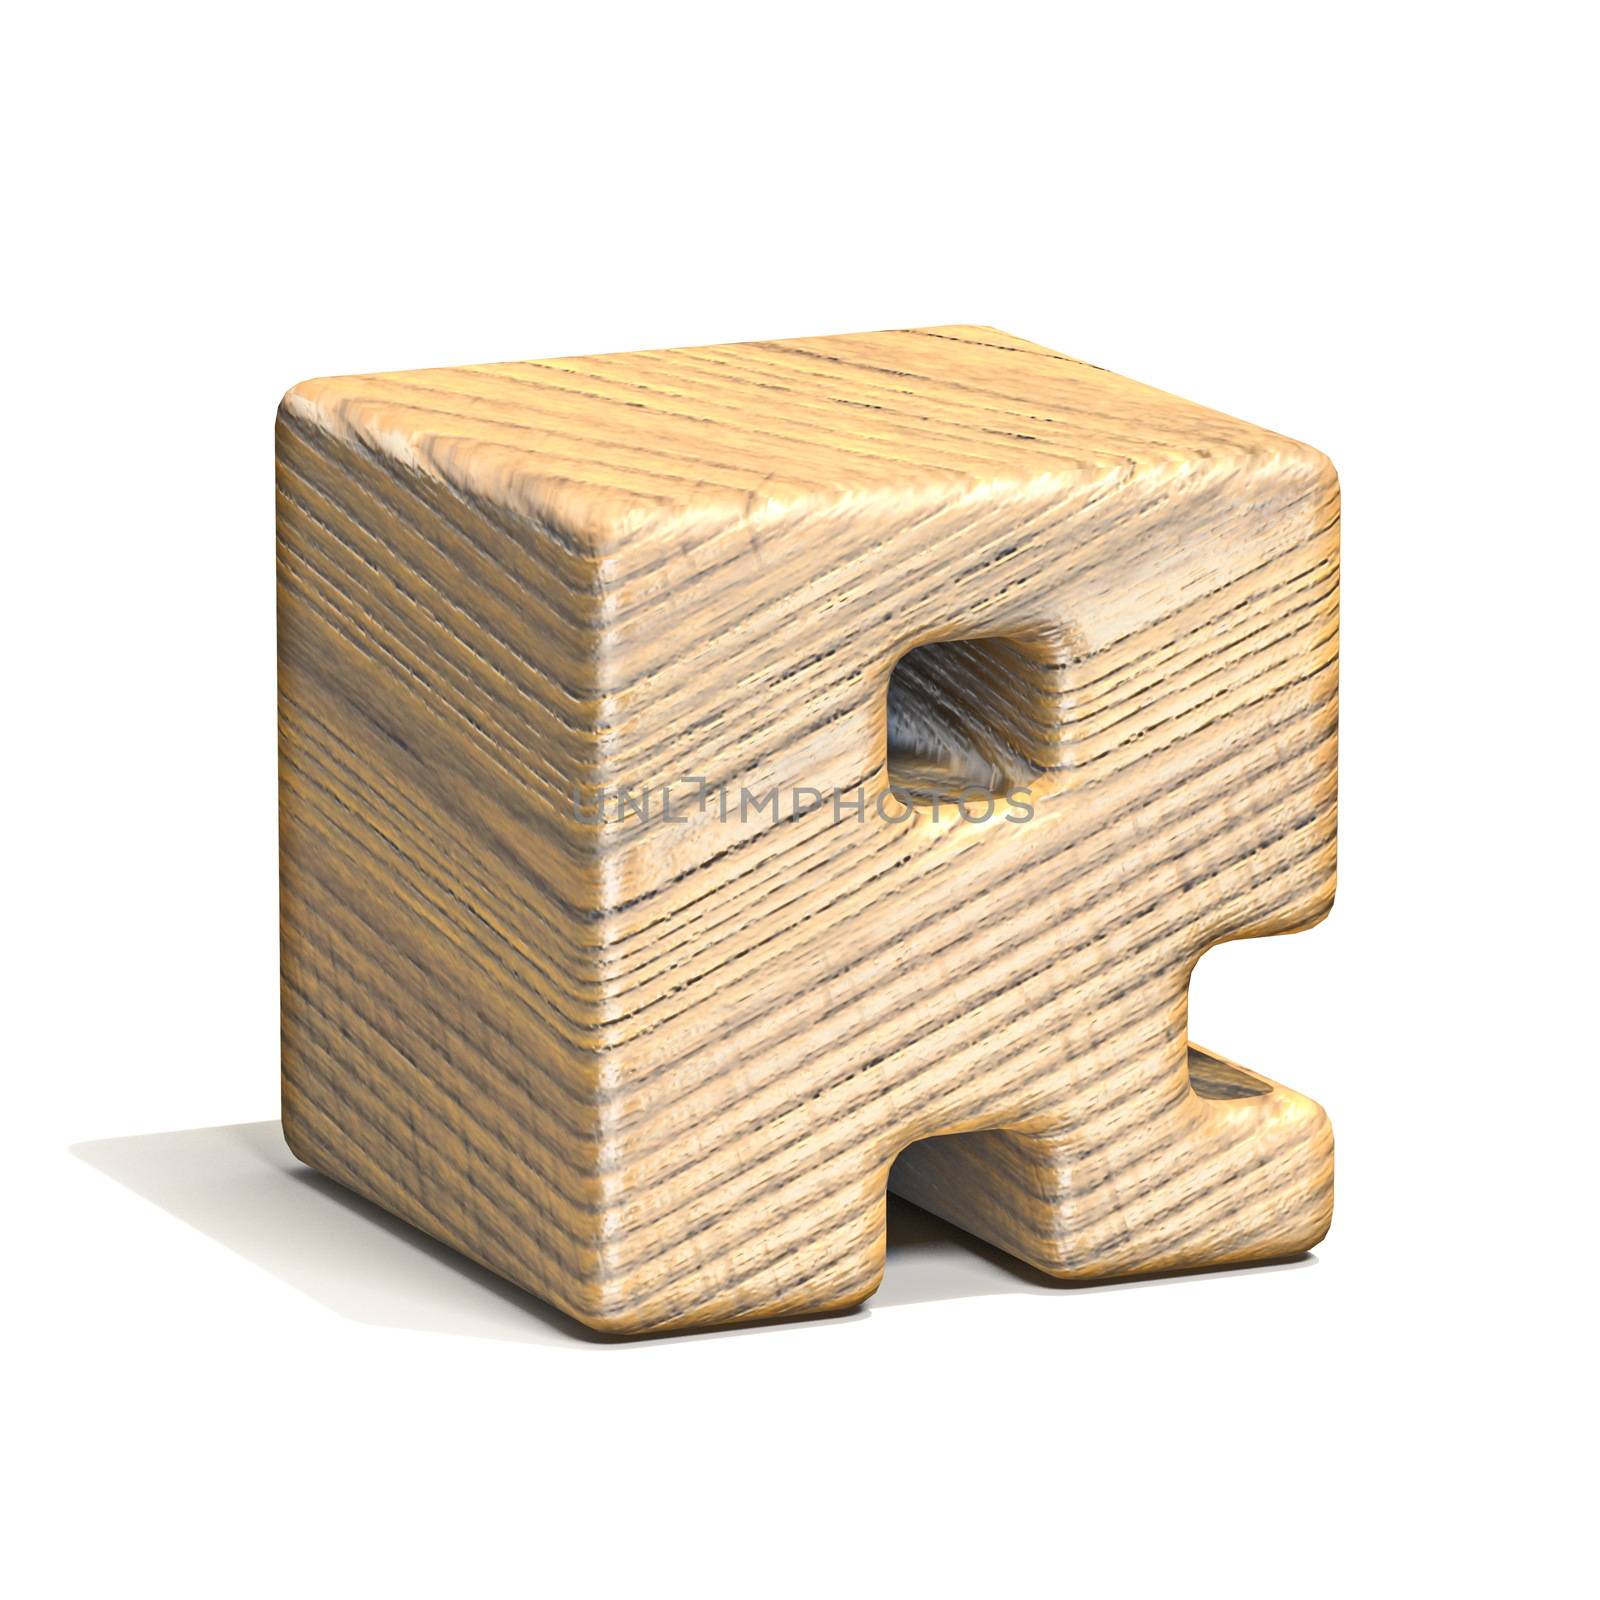 Solid wooden cube font Letter R 3D by djmilic